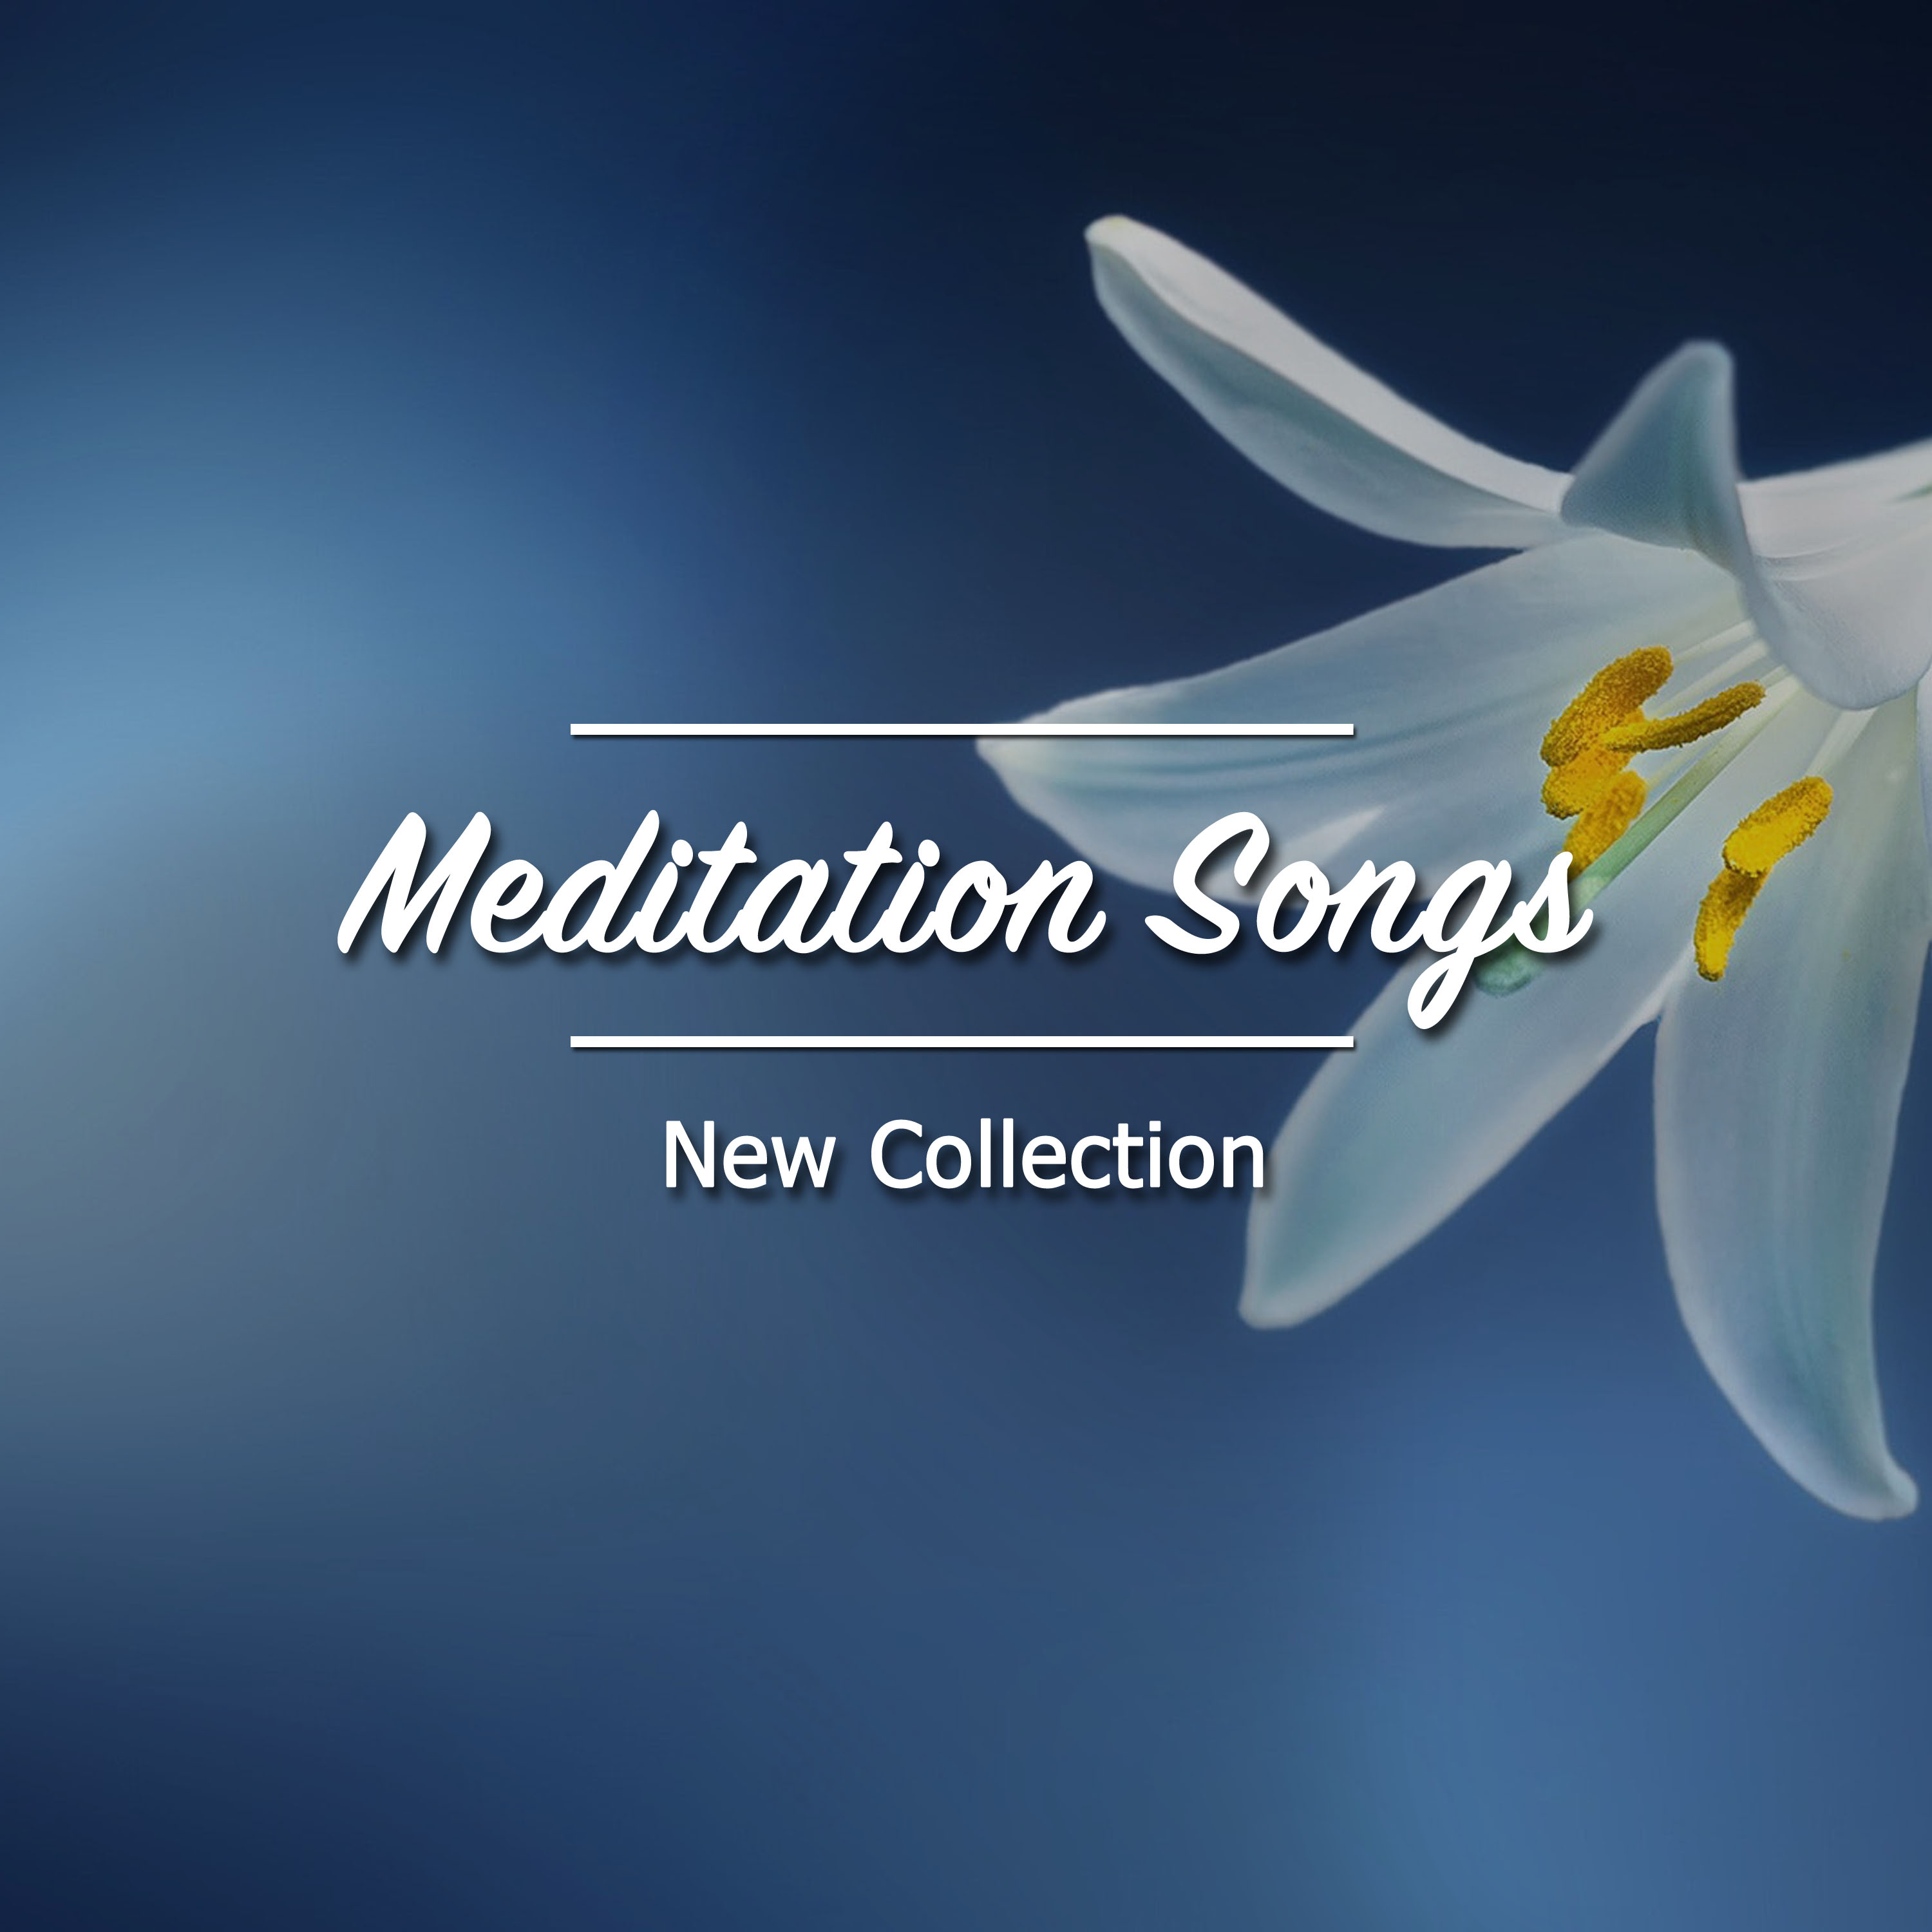 2018 New Collection of Meditation Songs